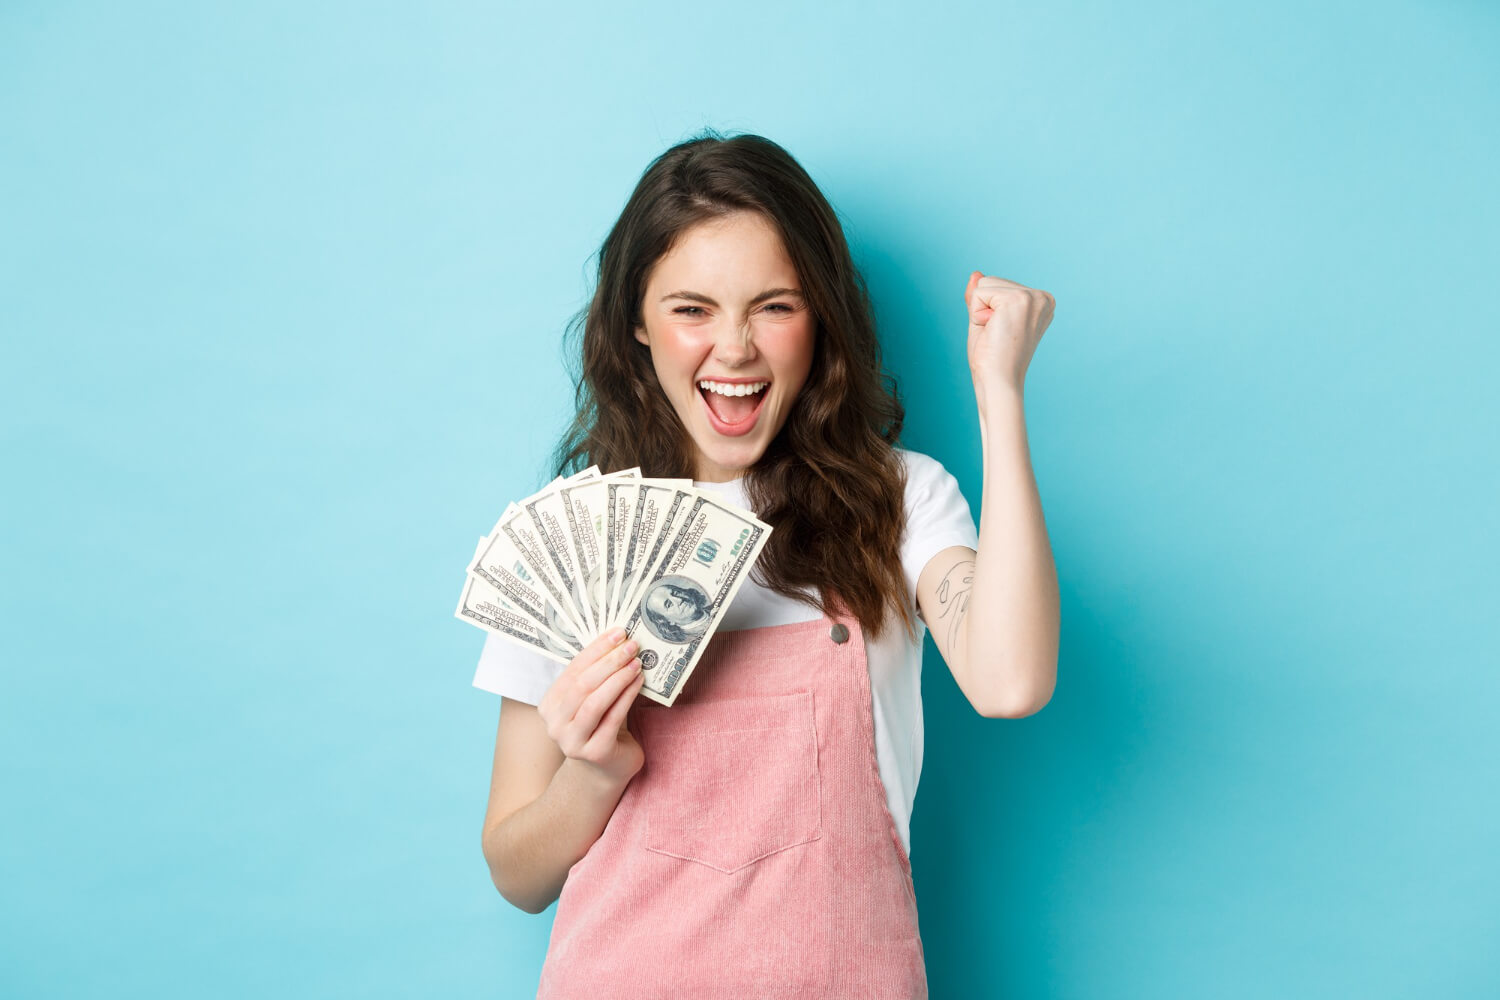 Excited young lady holding dollar bill